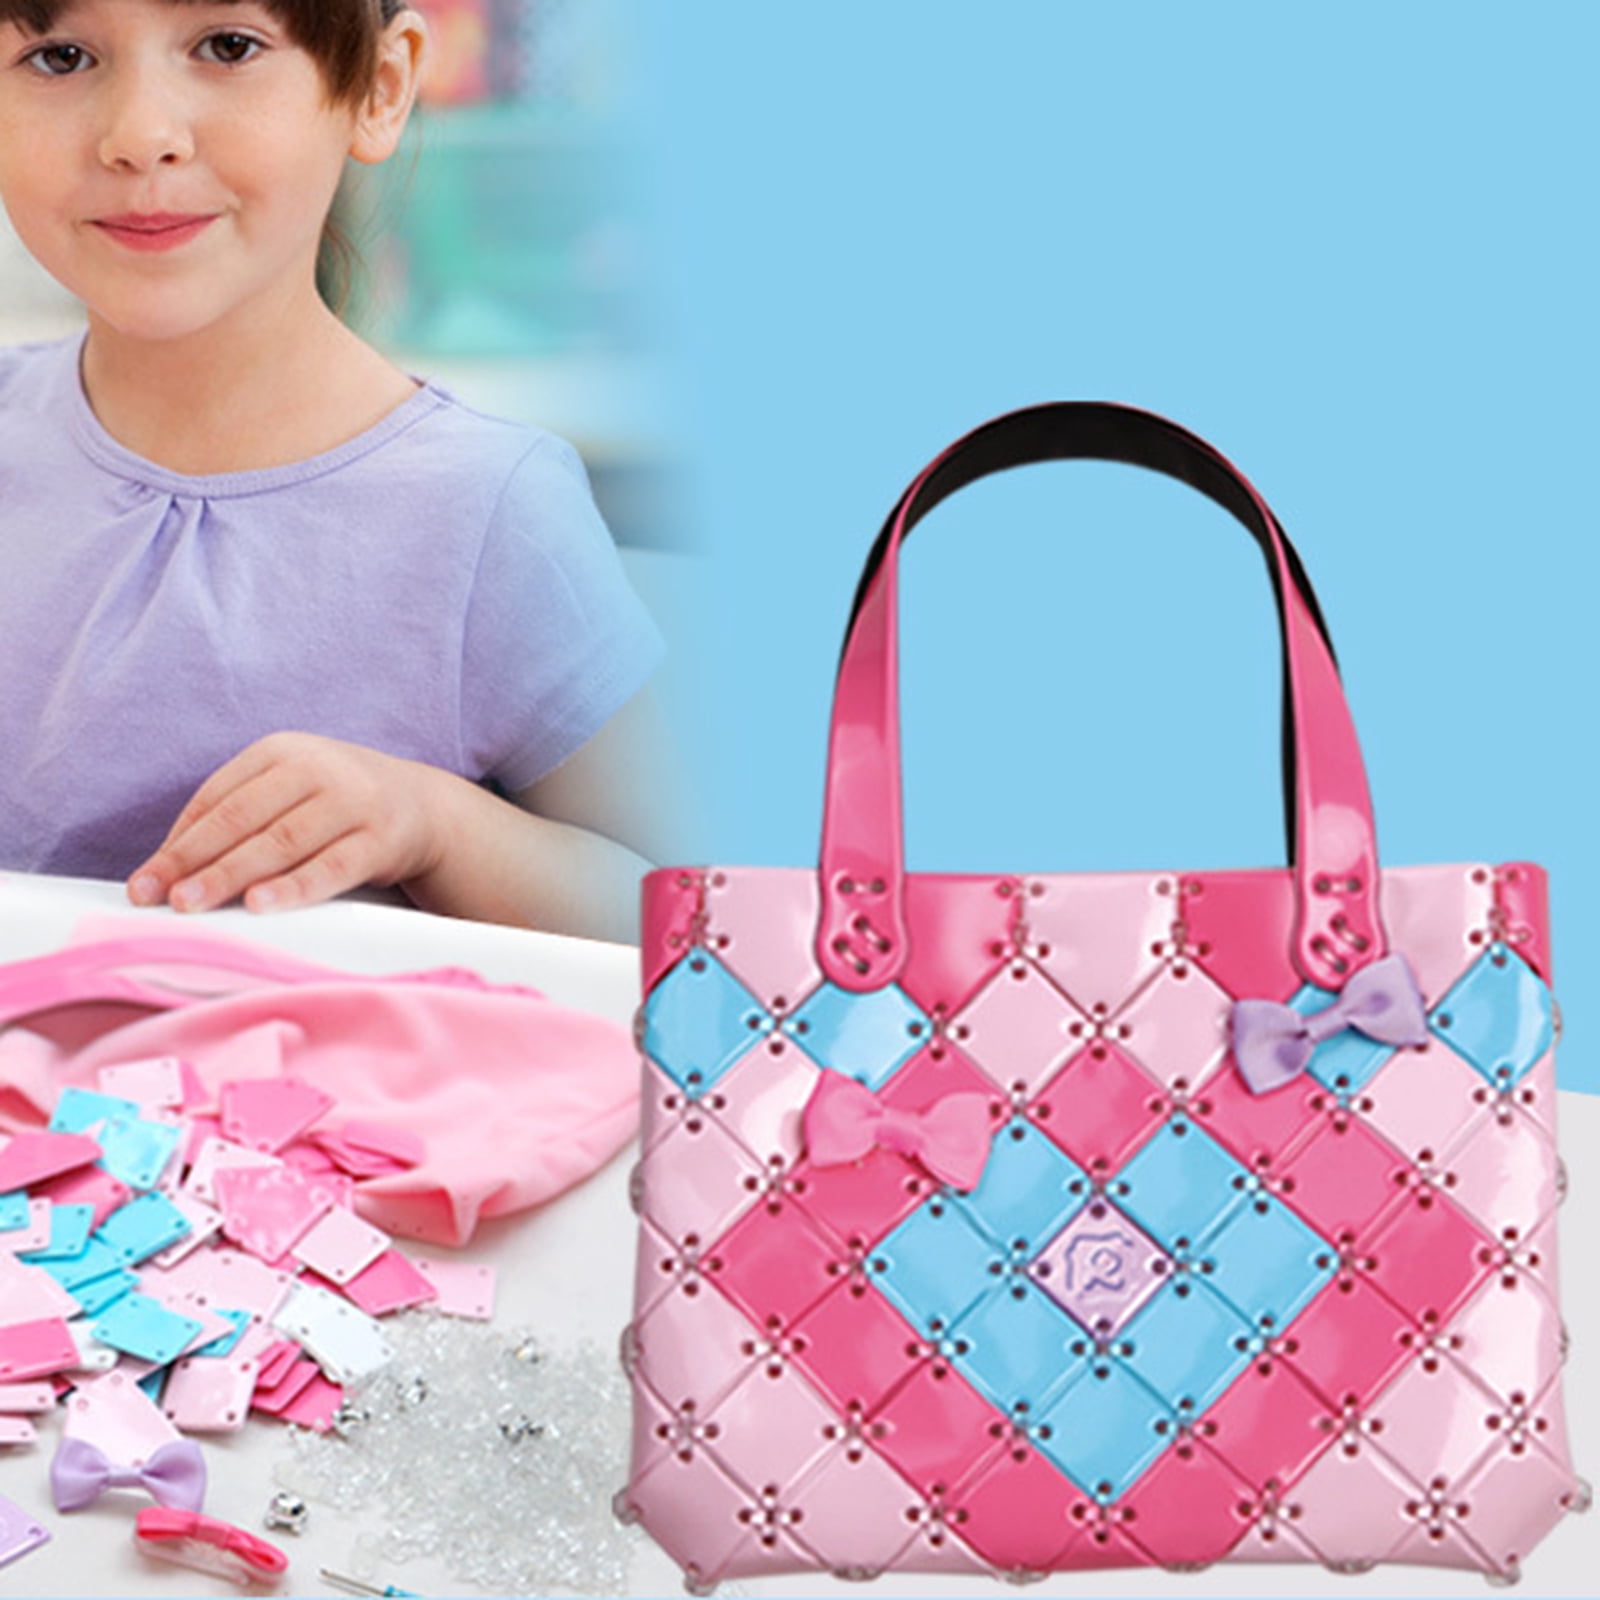  iStudio DIY Kids Craft Purse, Make Your Own Fashion Handbag for  Girls,Detachable Fun Arts & Craft Activity kit for Kid,Cute Young Girl Gift  (Ages 6+) : Toys & Games